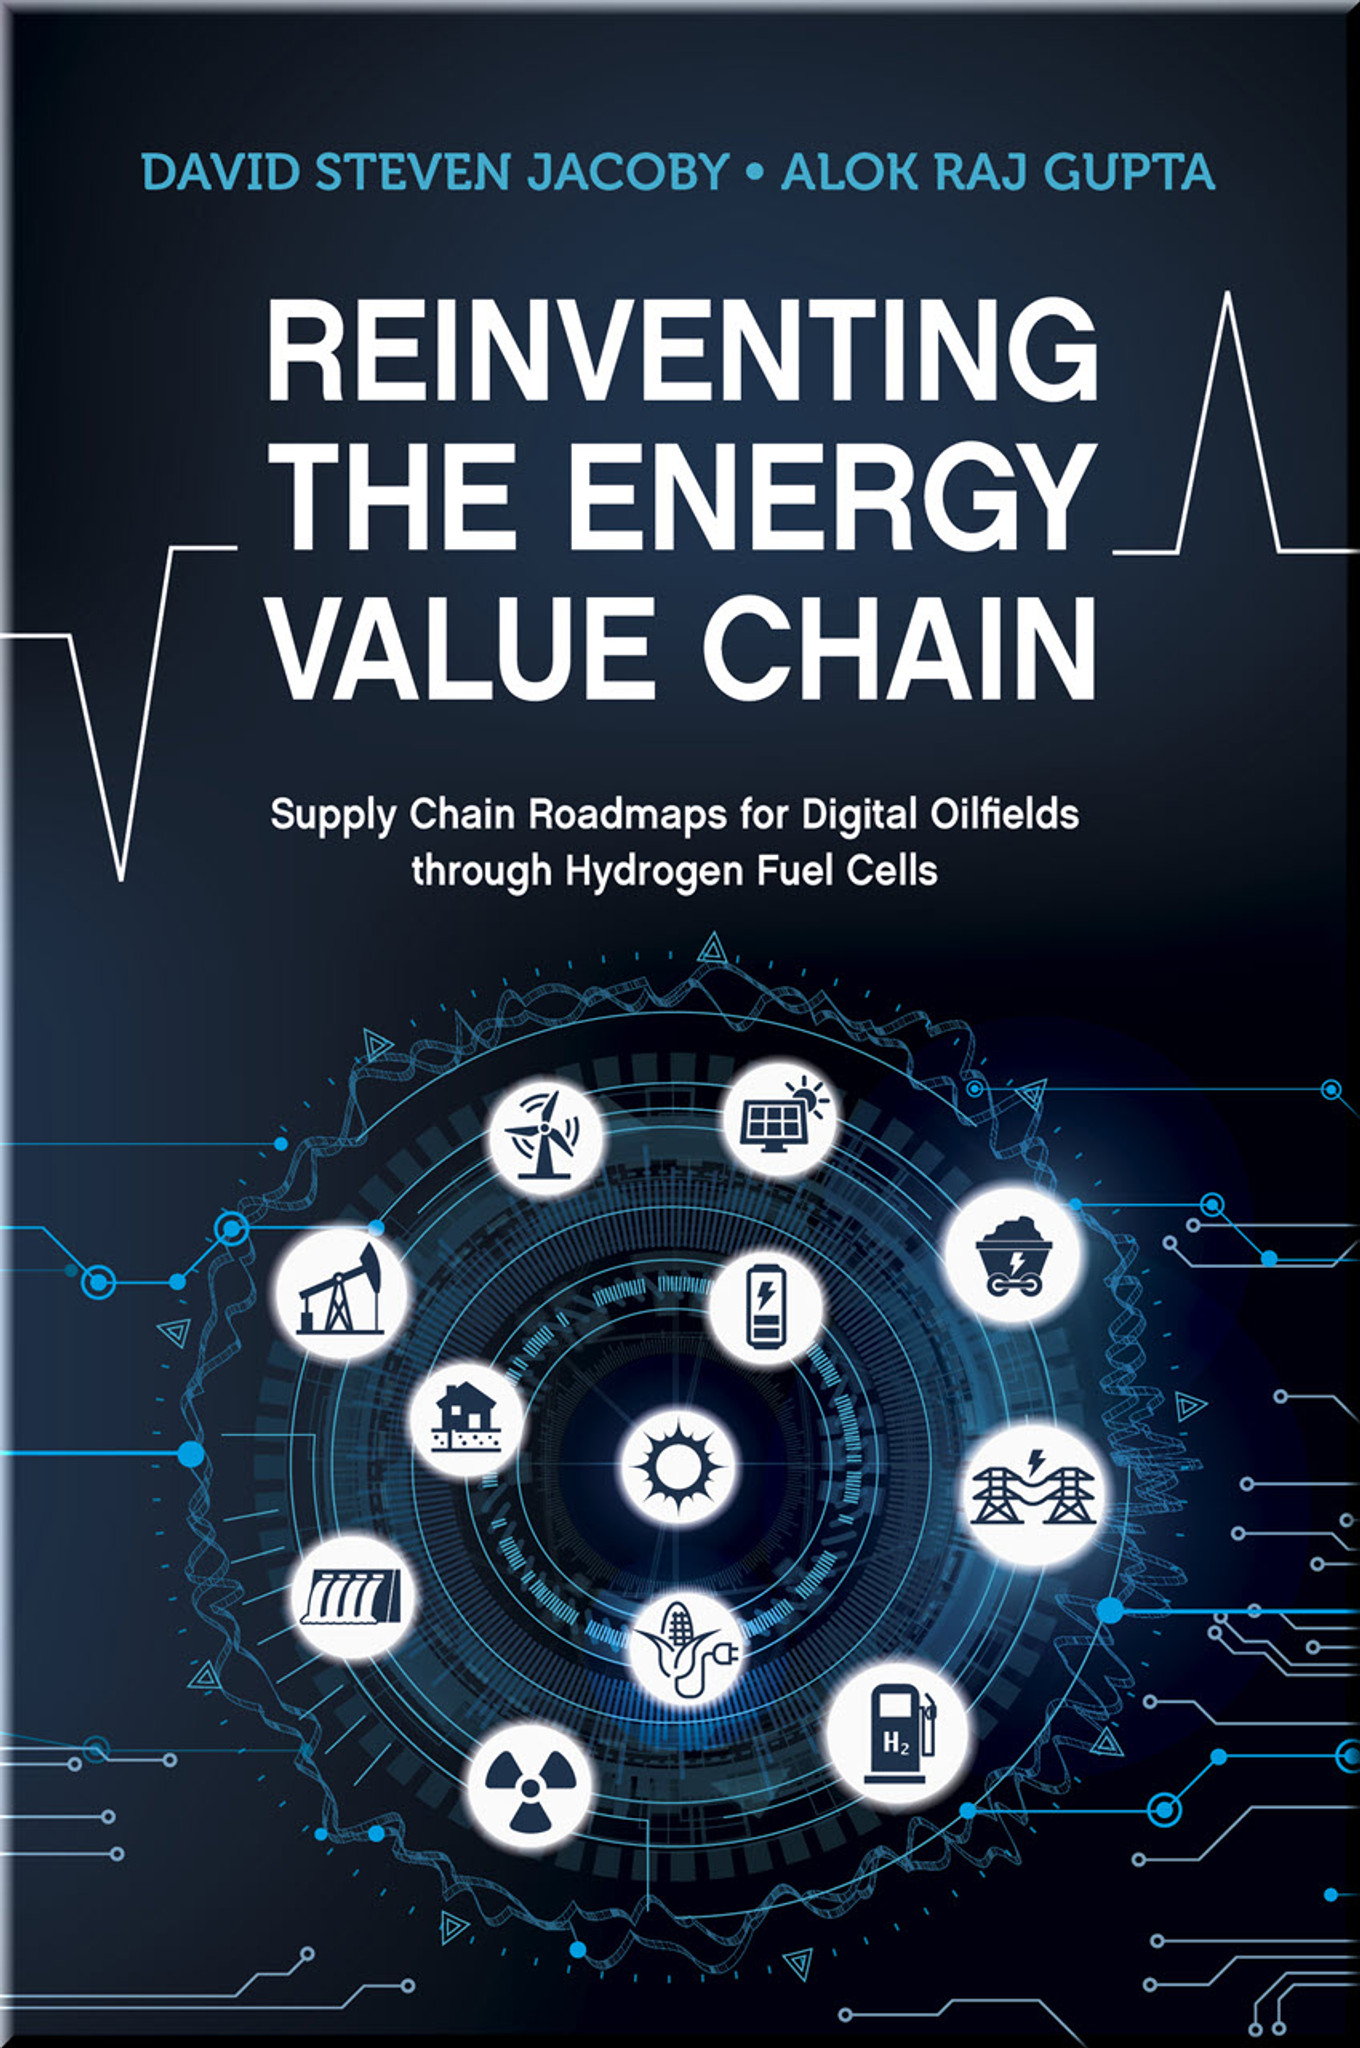 Chain　Chain:　Cells　Value　Jacoby　Alok　Reinventing　R.　Oilfields　Book　Steven　Gupta　through　Energy　Digital　the　ISBN:　Hydrogen　Supply　9781955578004　Fuel　Roadmaps　for　David